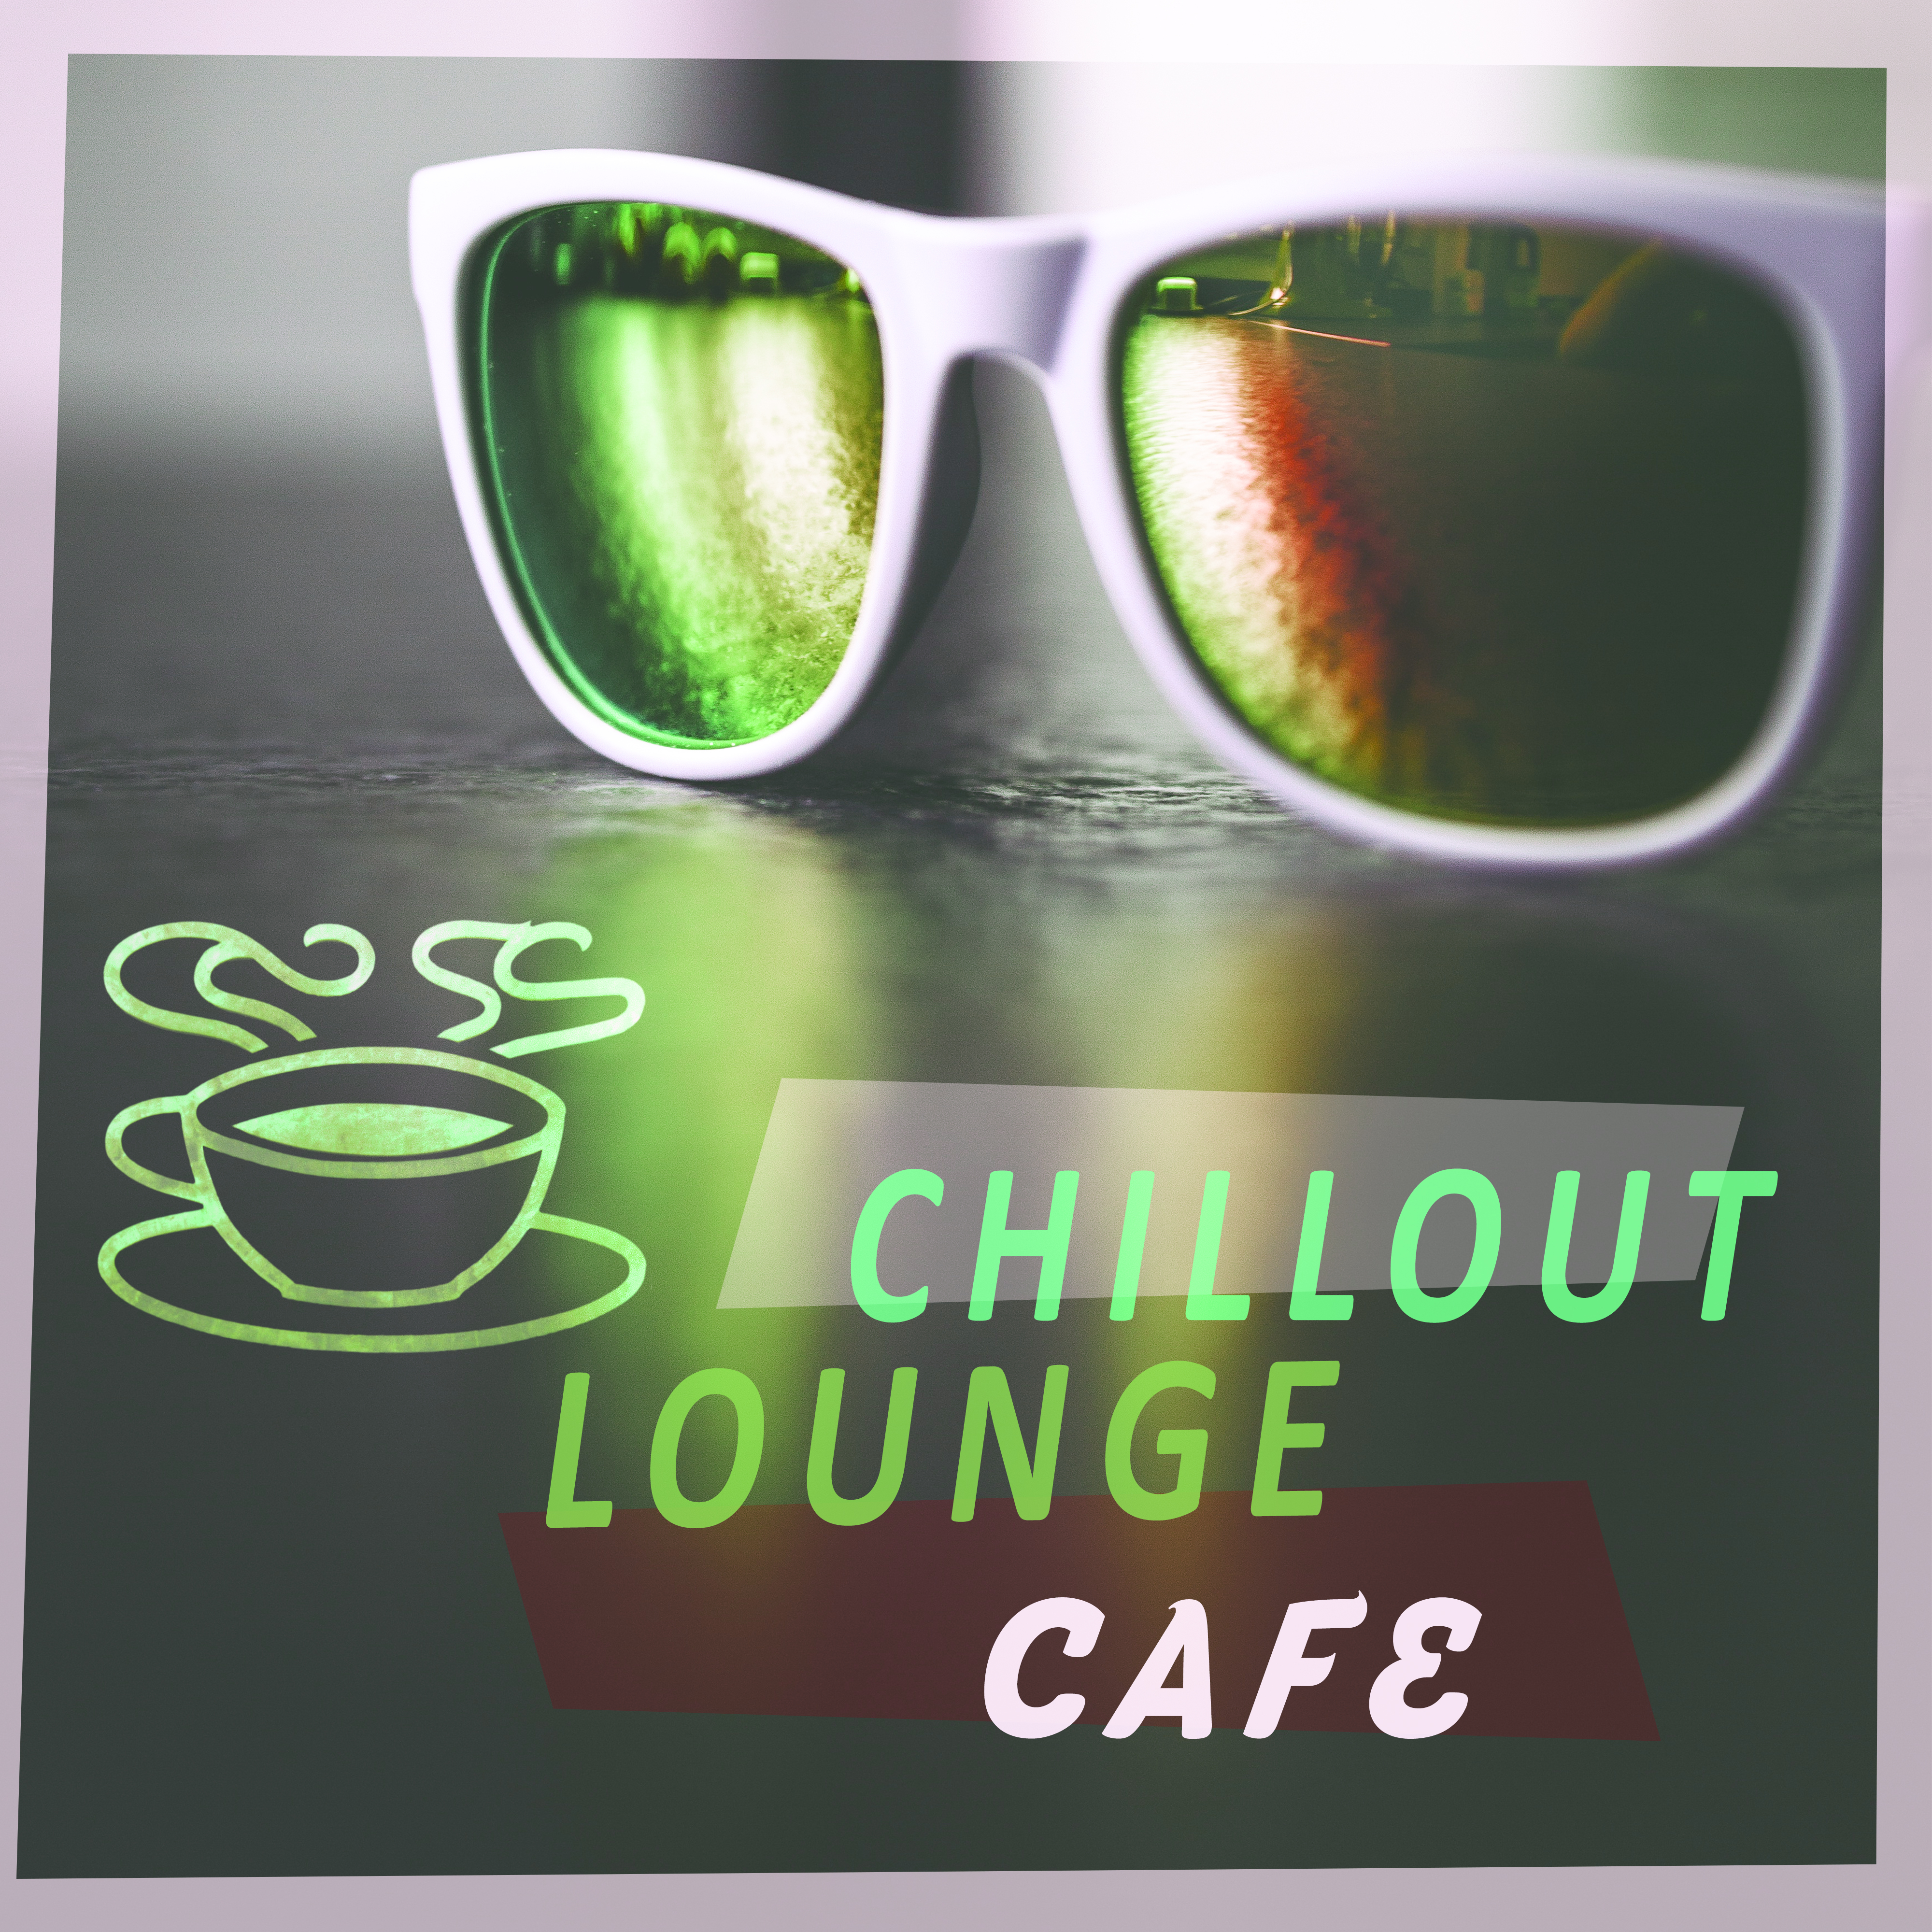 Chillout Lounge Cafe – Best Chill Out Music for Restaurant, Music to Relax, Hot Coffee, Chill Yourself